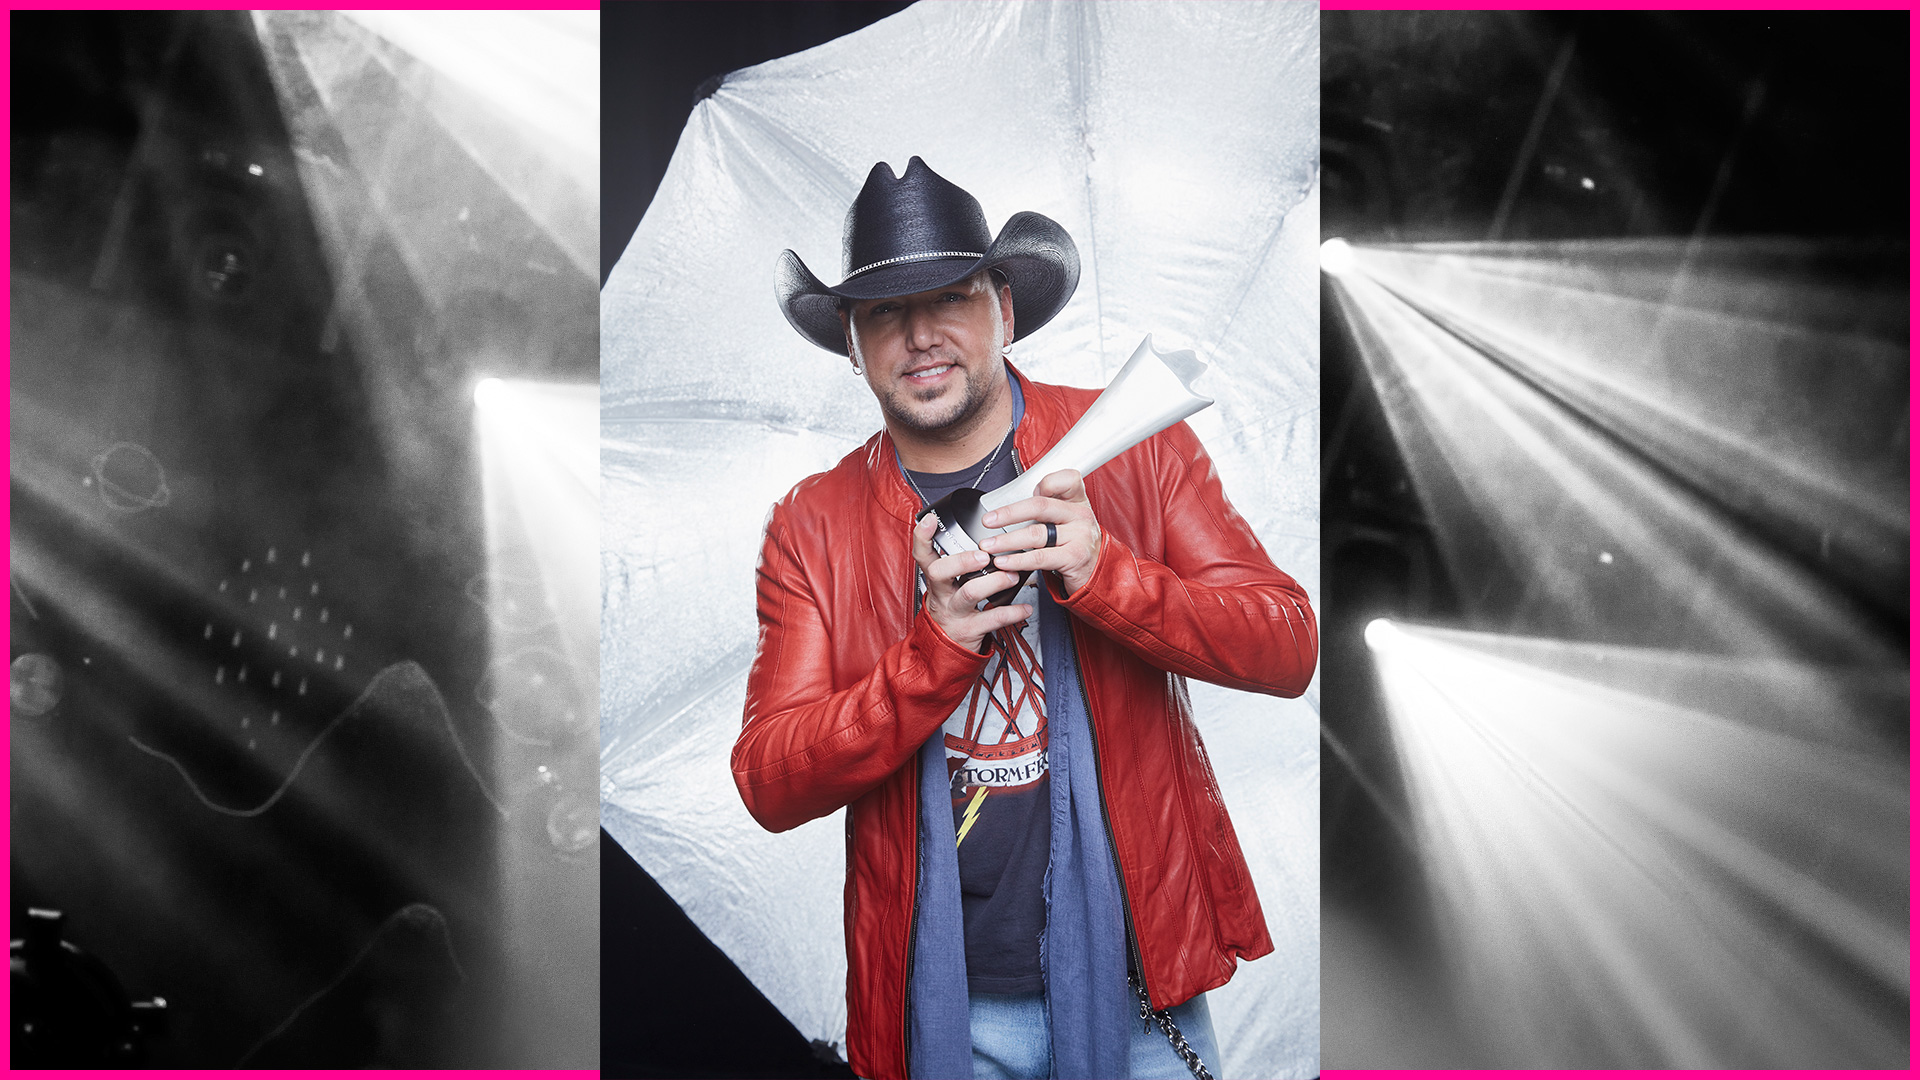 Jason Aldean celebrates his Entertainer Of The Year win with a gracious smile.